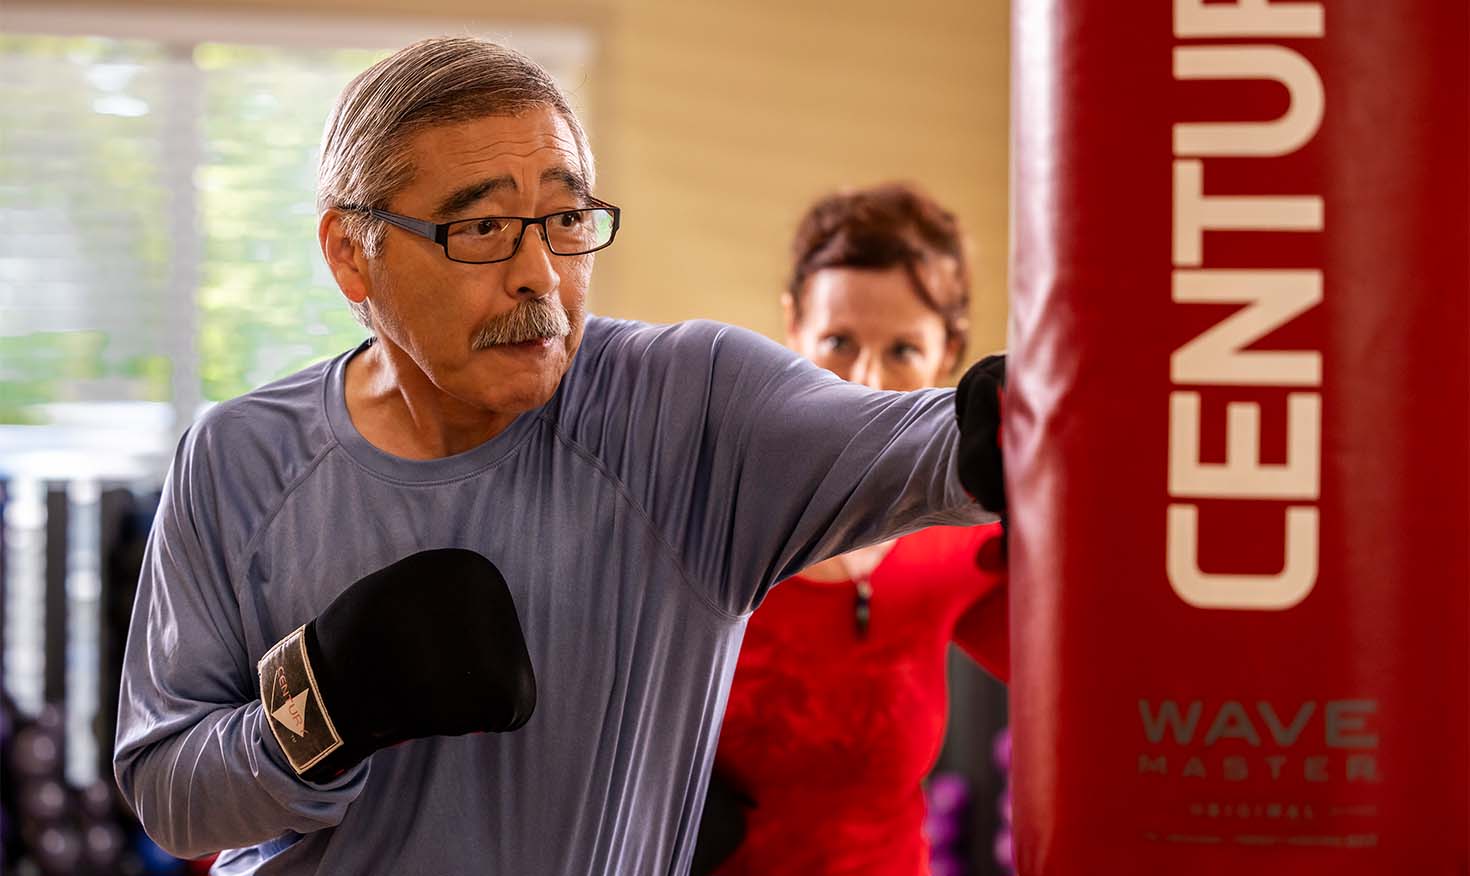 Senior man taking a boxing fitness class